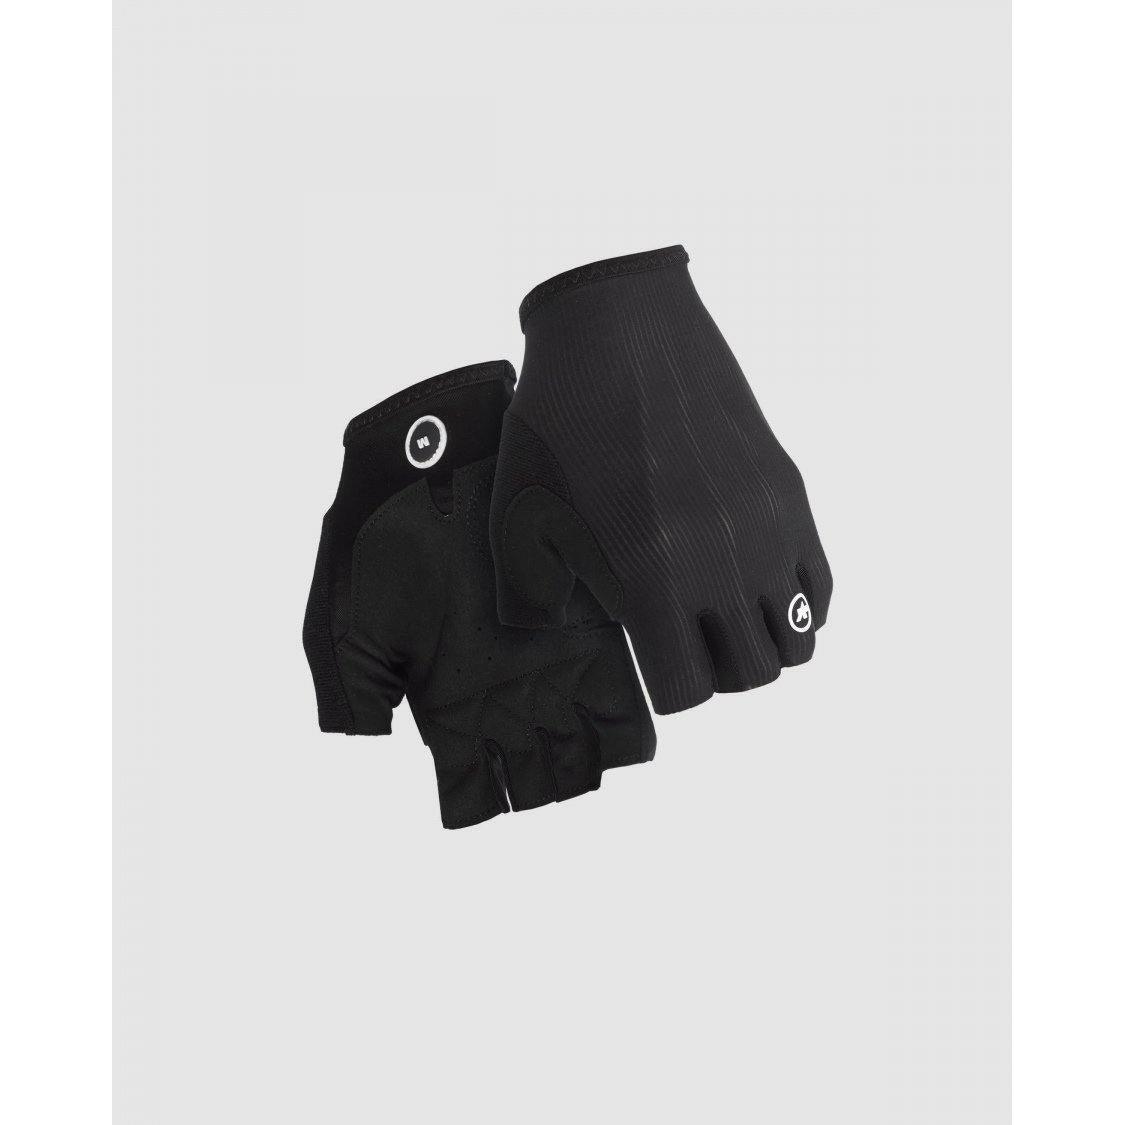 Assos of Switzerland RS Aero SF Gloves | Strictly Bicycles